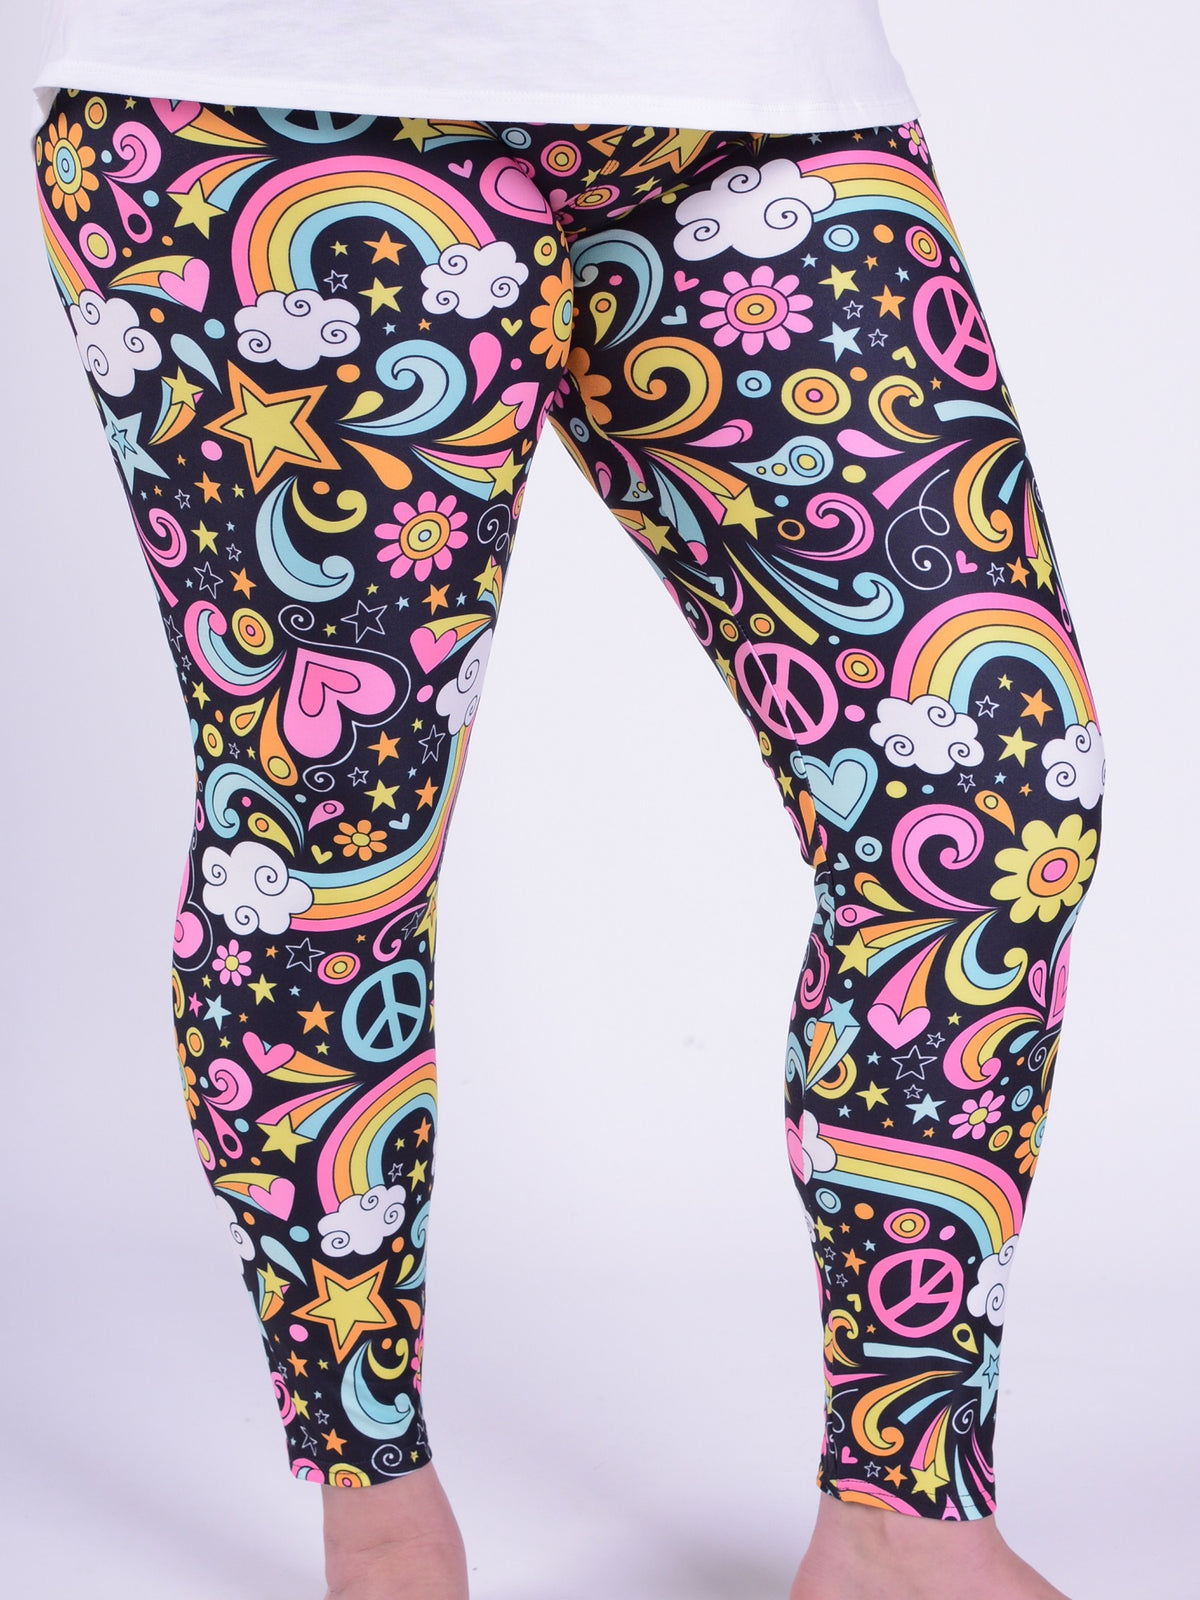 Leggings - Peace and Love - L46, Trousers, Pure Plus Clothing, Lagenlook Clothing, Plus Size Fashion, Over 50 Fashion